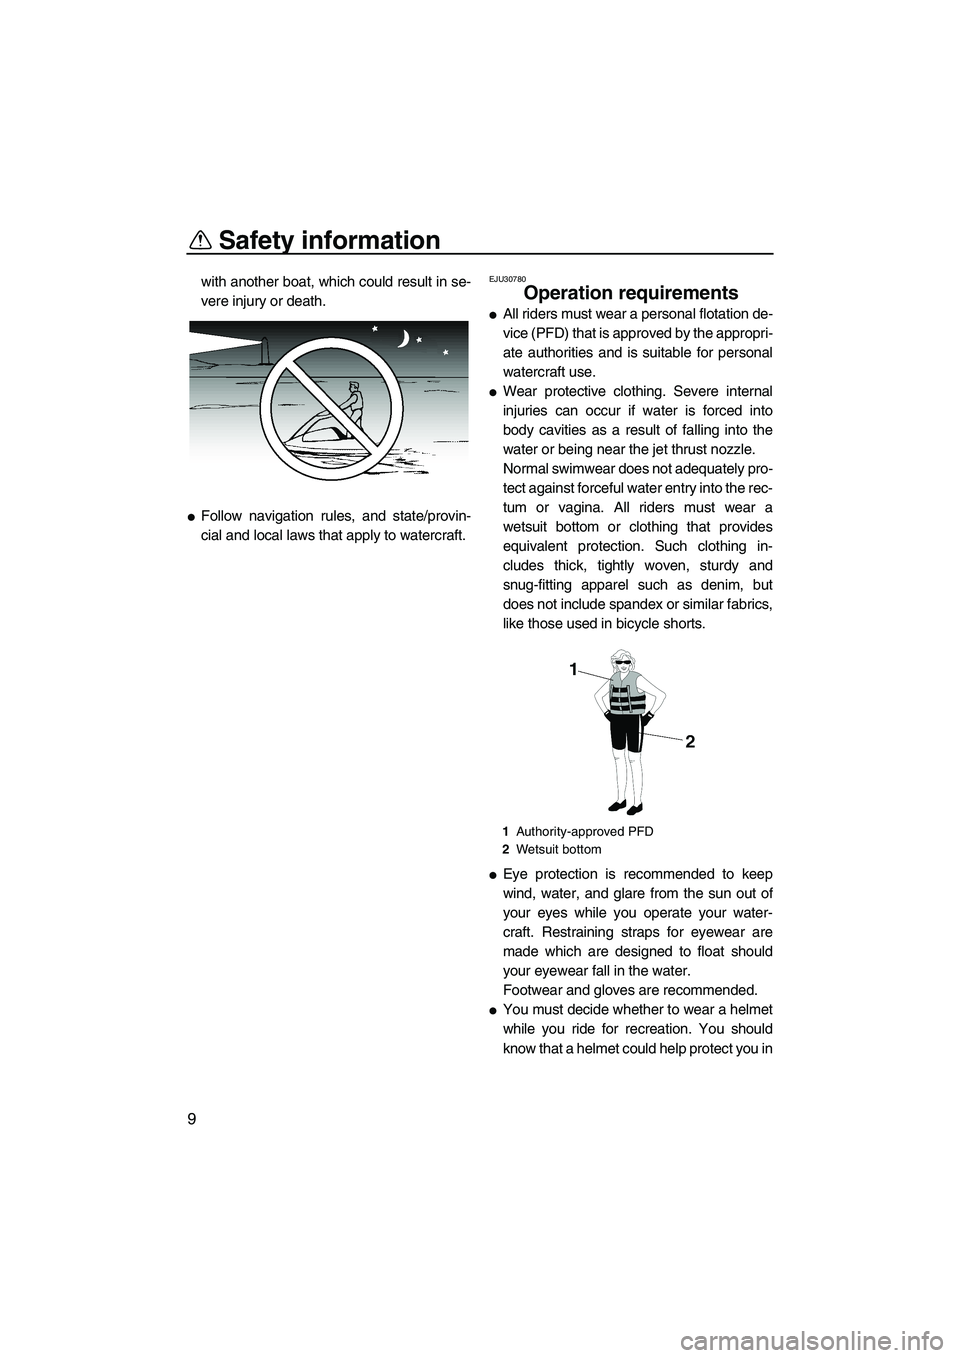 YAMAHA SUPERJET 2008 User Guide Safety information
9
with another boat, which could result in se-
vere injury or death.
Follow navigation rules, and state/provin-
cial and local laws that apply to watercraft.
EJU30780
Operation req